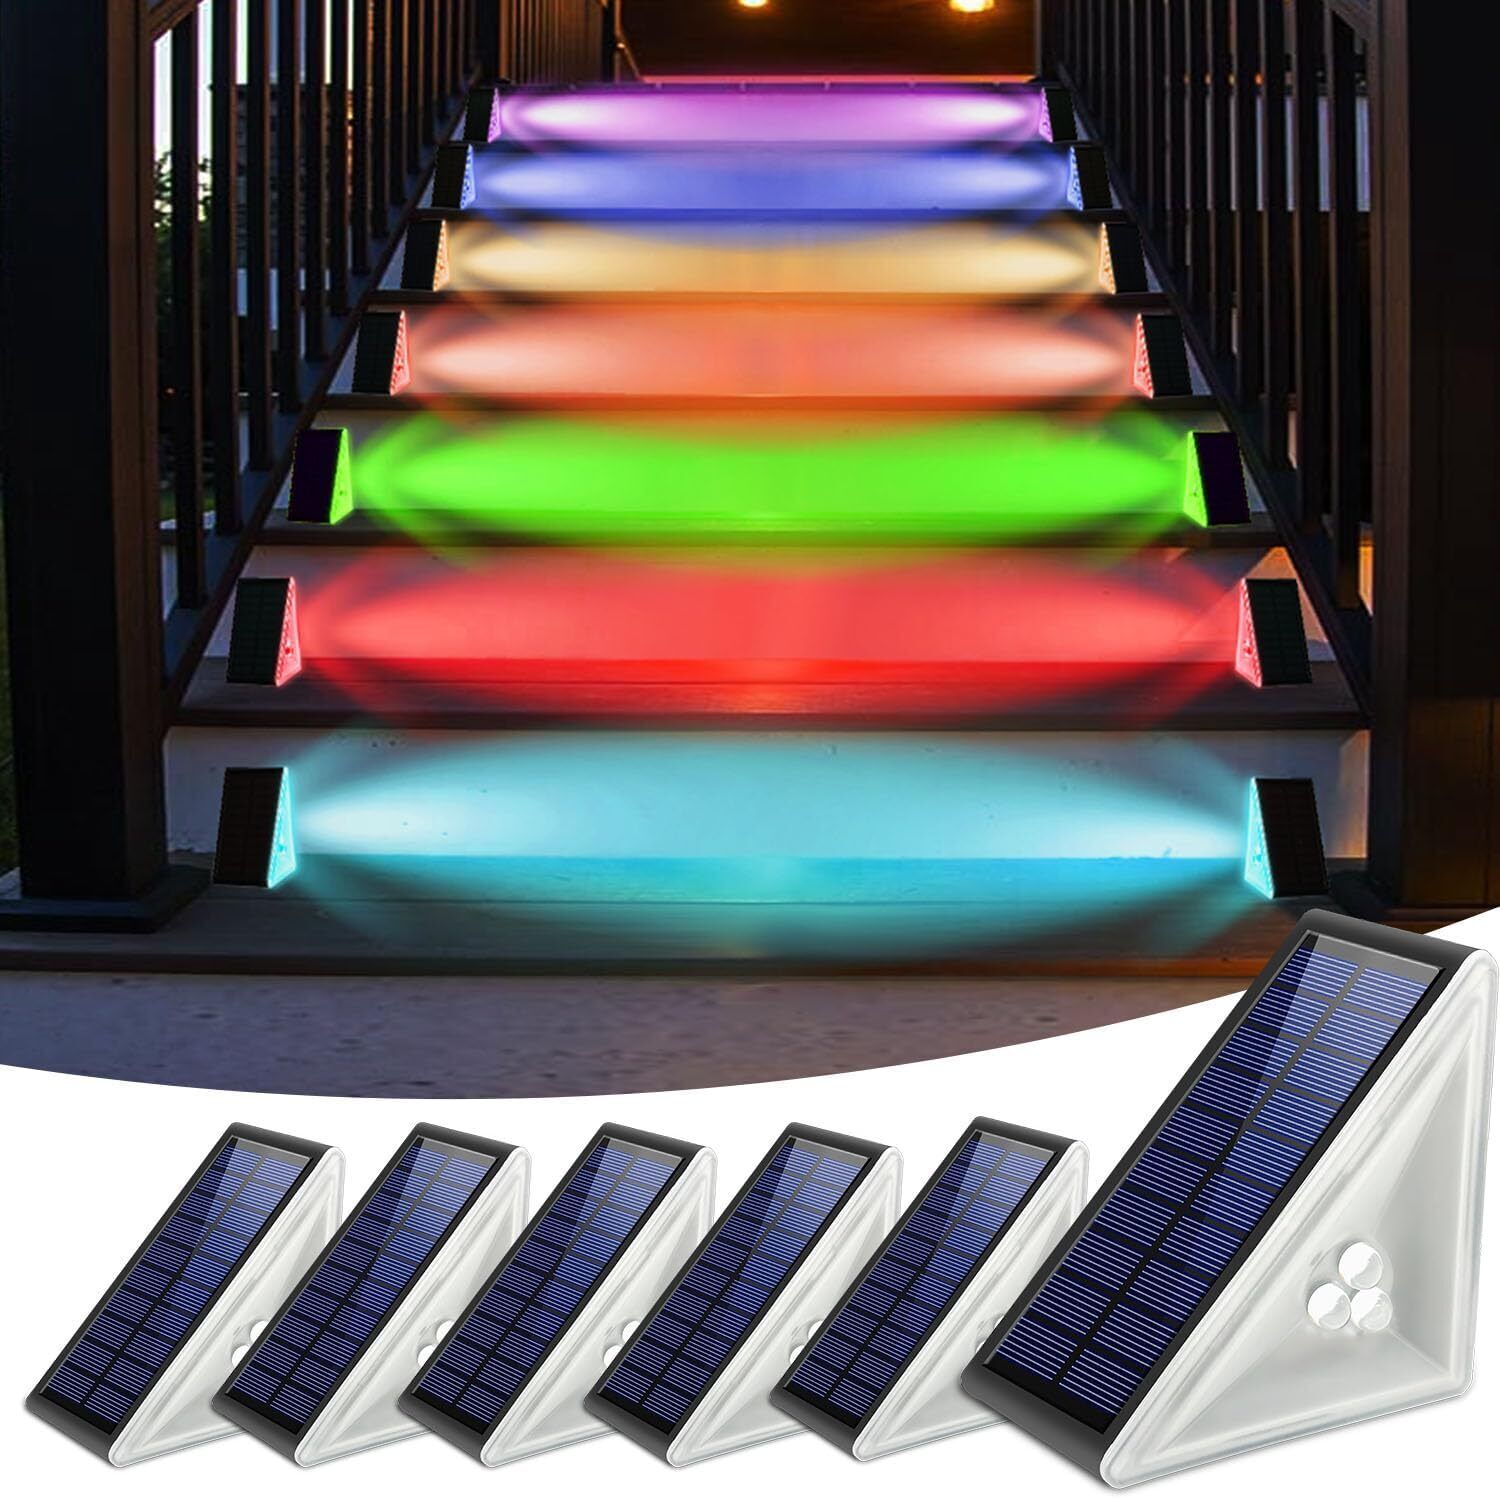 6 Pack Solar Step Lights 6 Pack Stair Light with 3 LED Patio Yard,Decoration,RGB